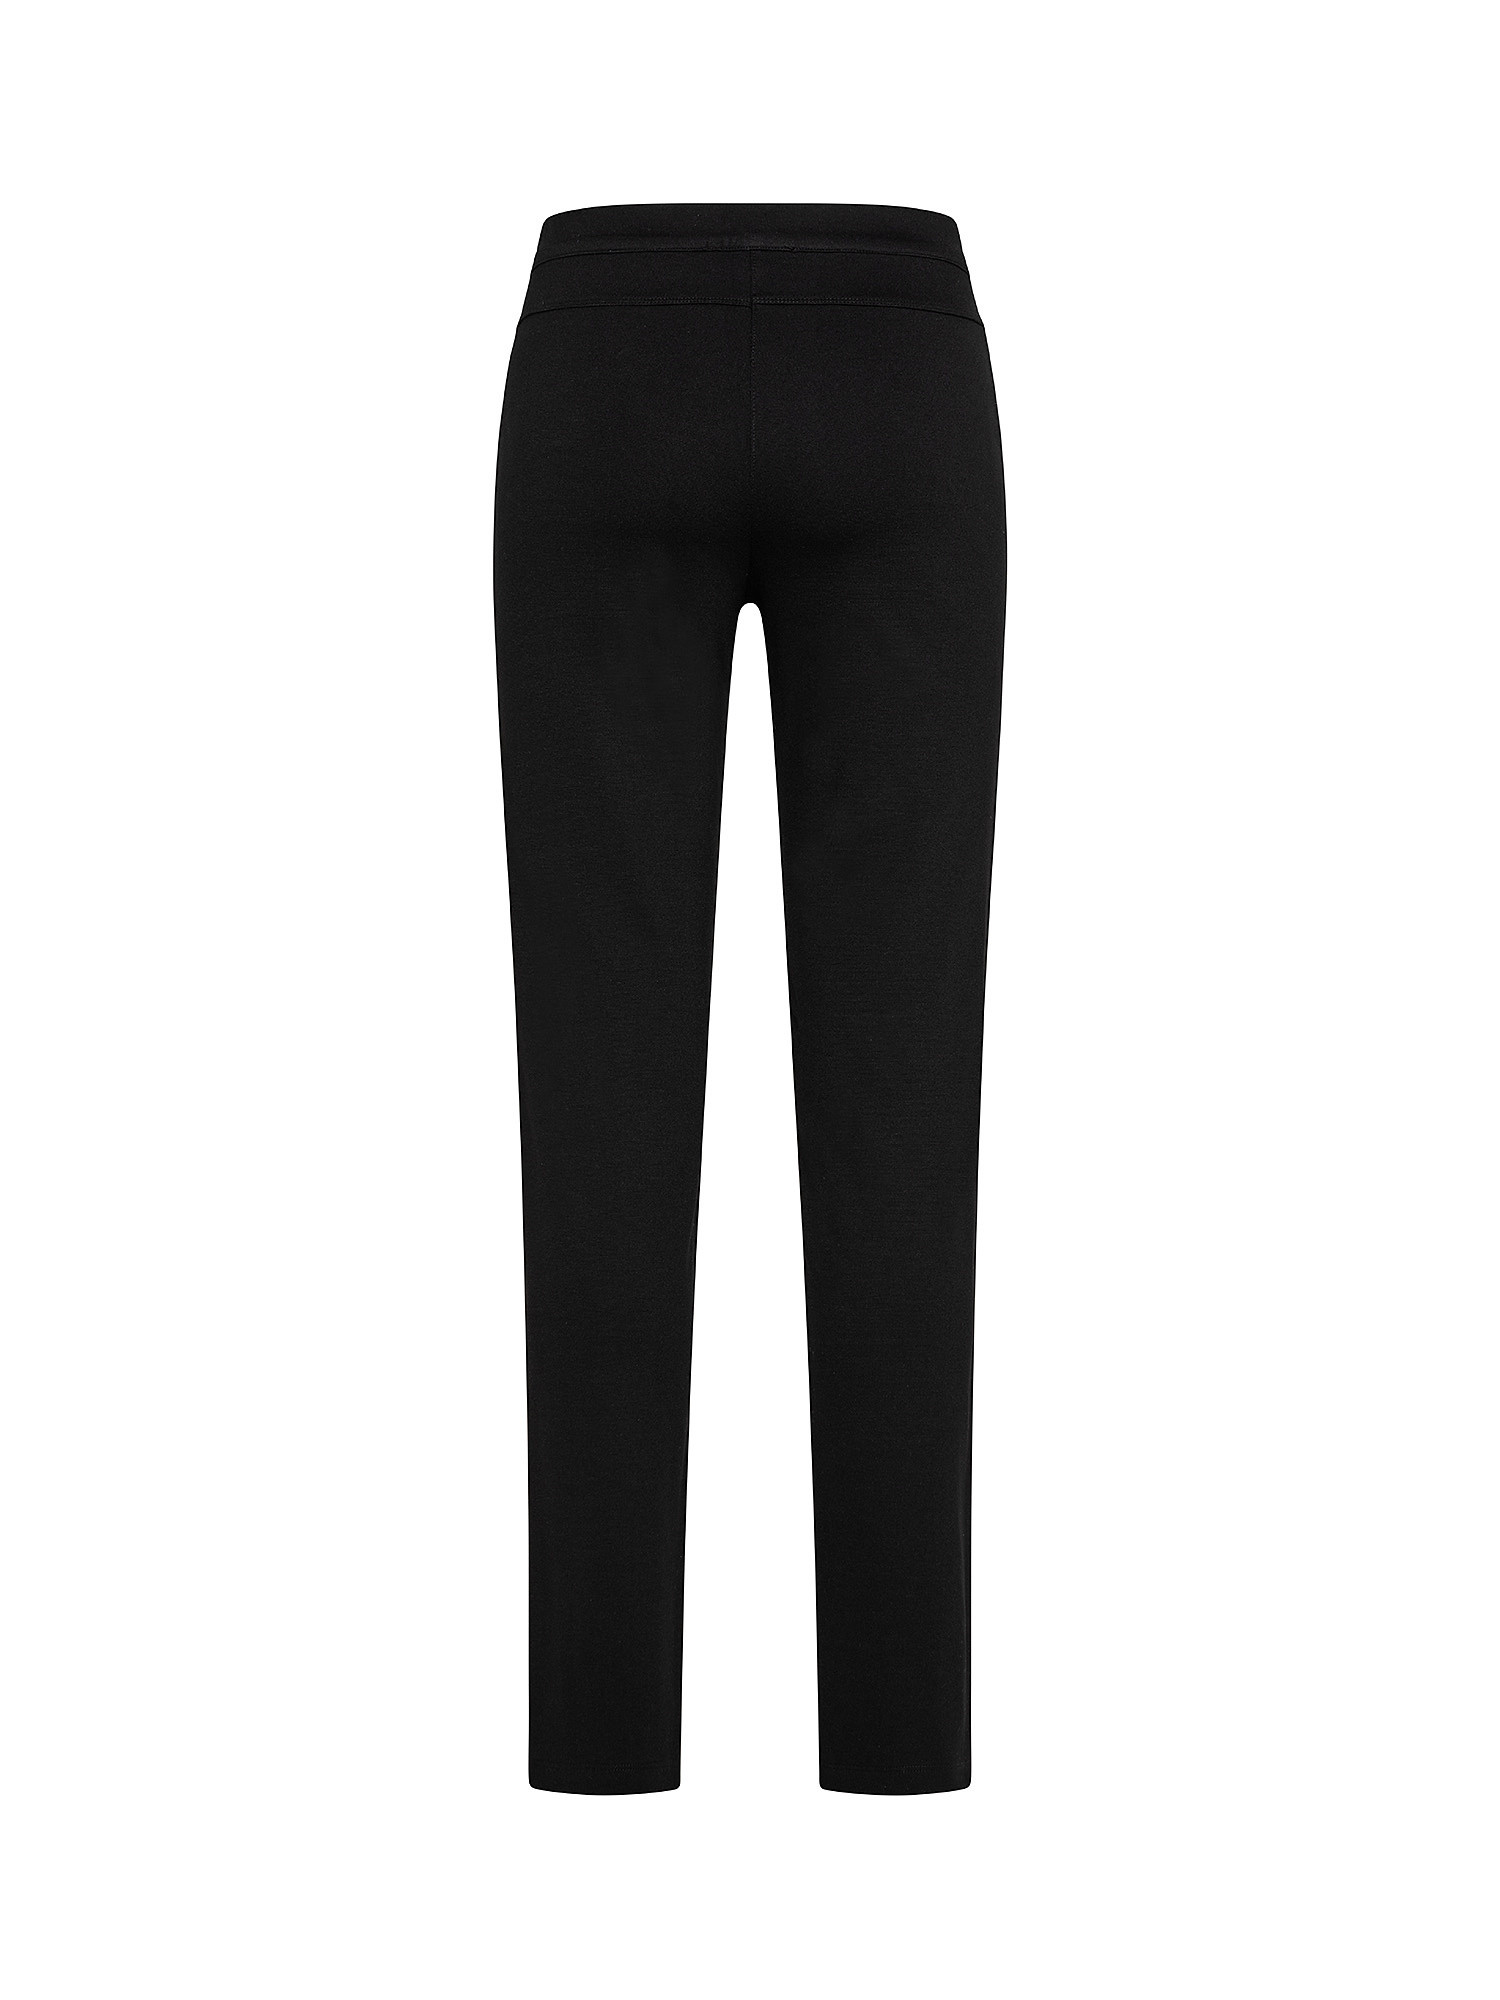 Trousers with pockets, Black, large image number 1